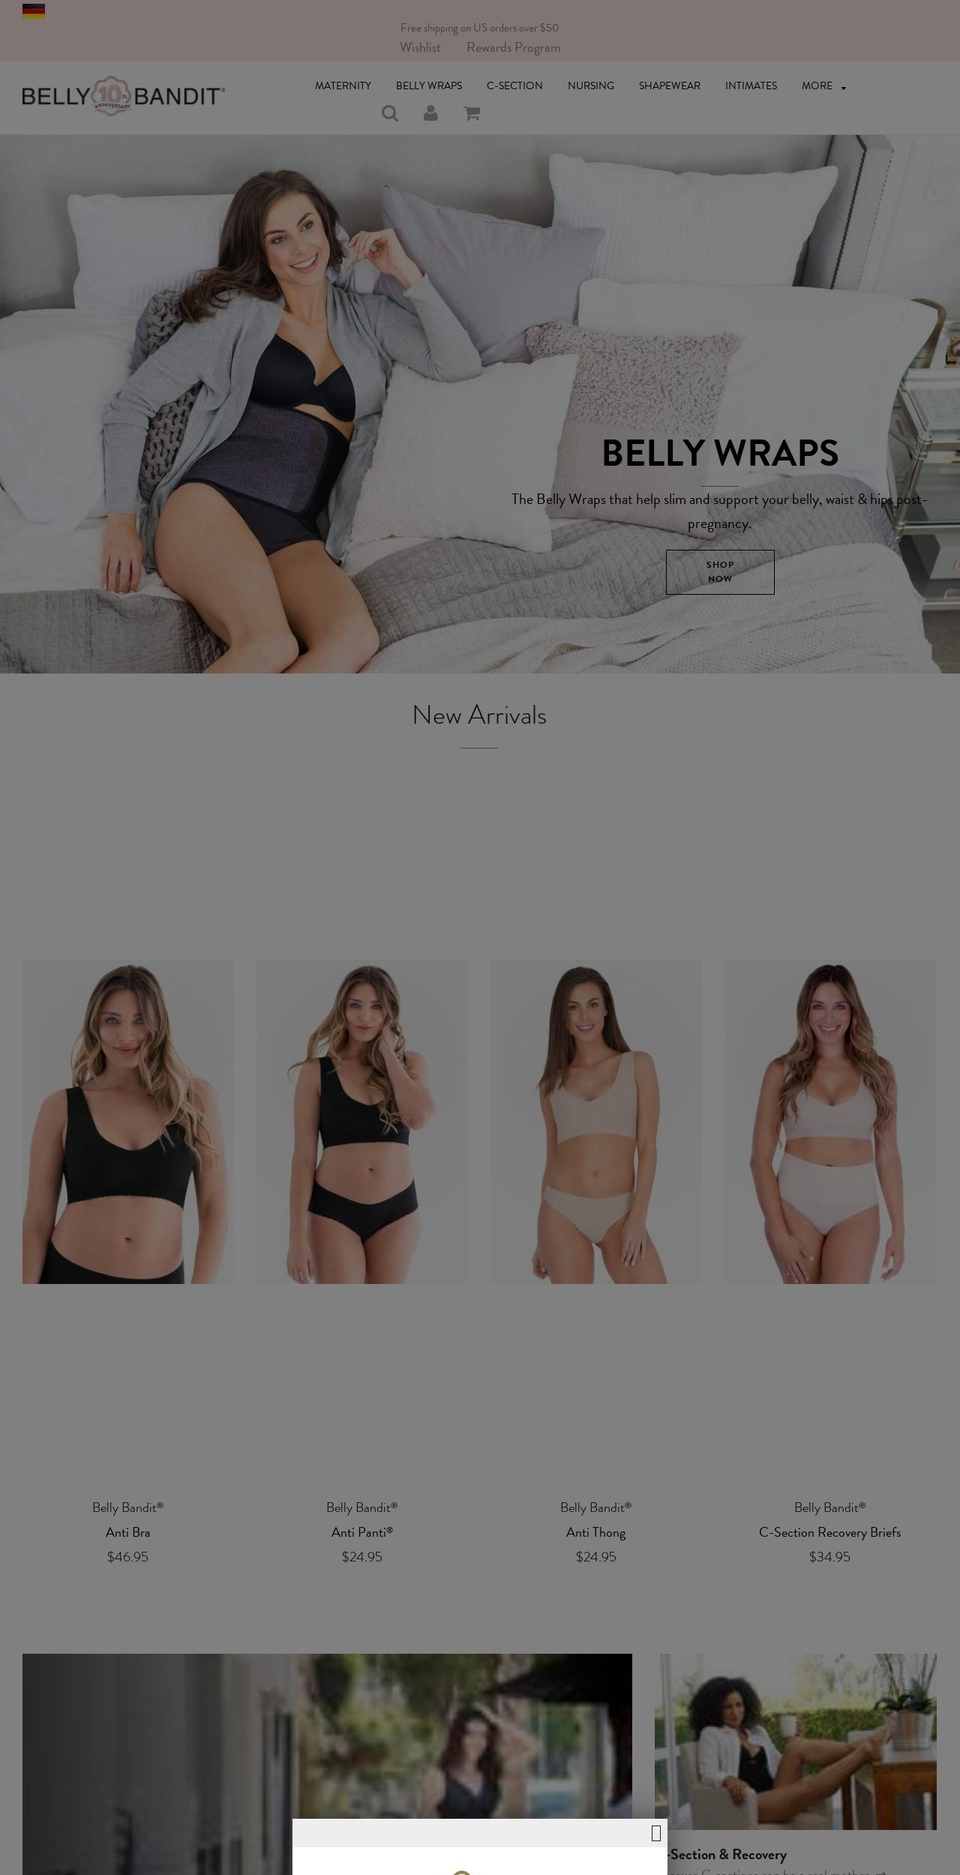 Copy of Flow Shopify theme site example bellyaid.com